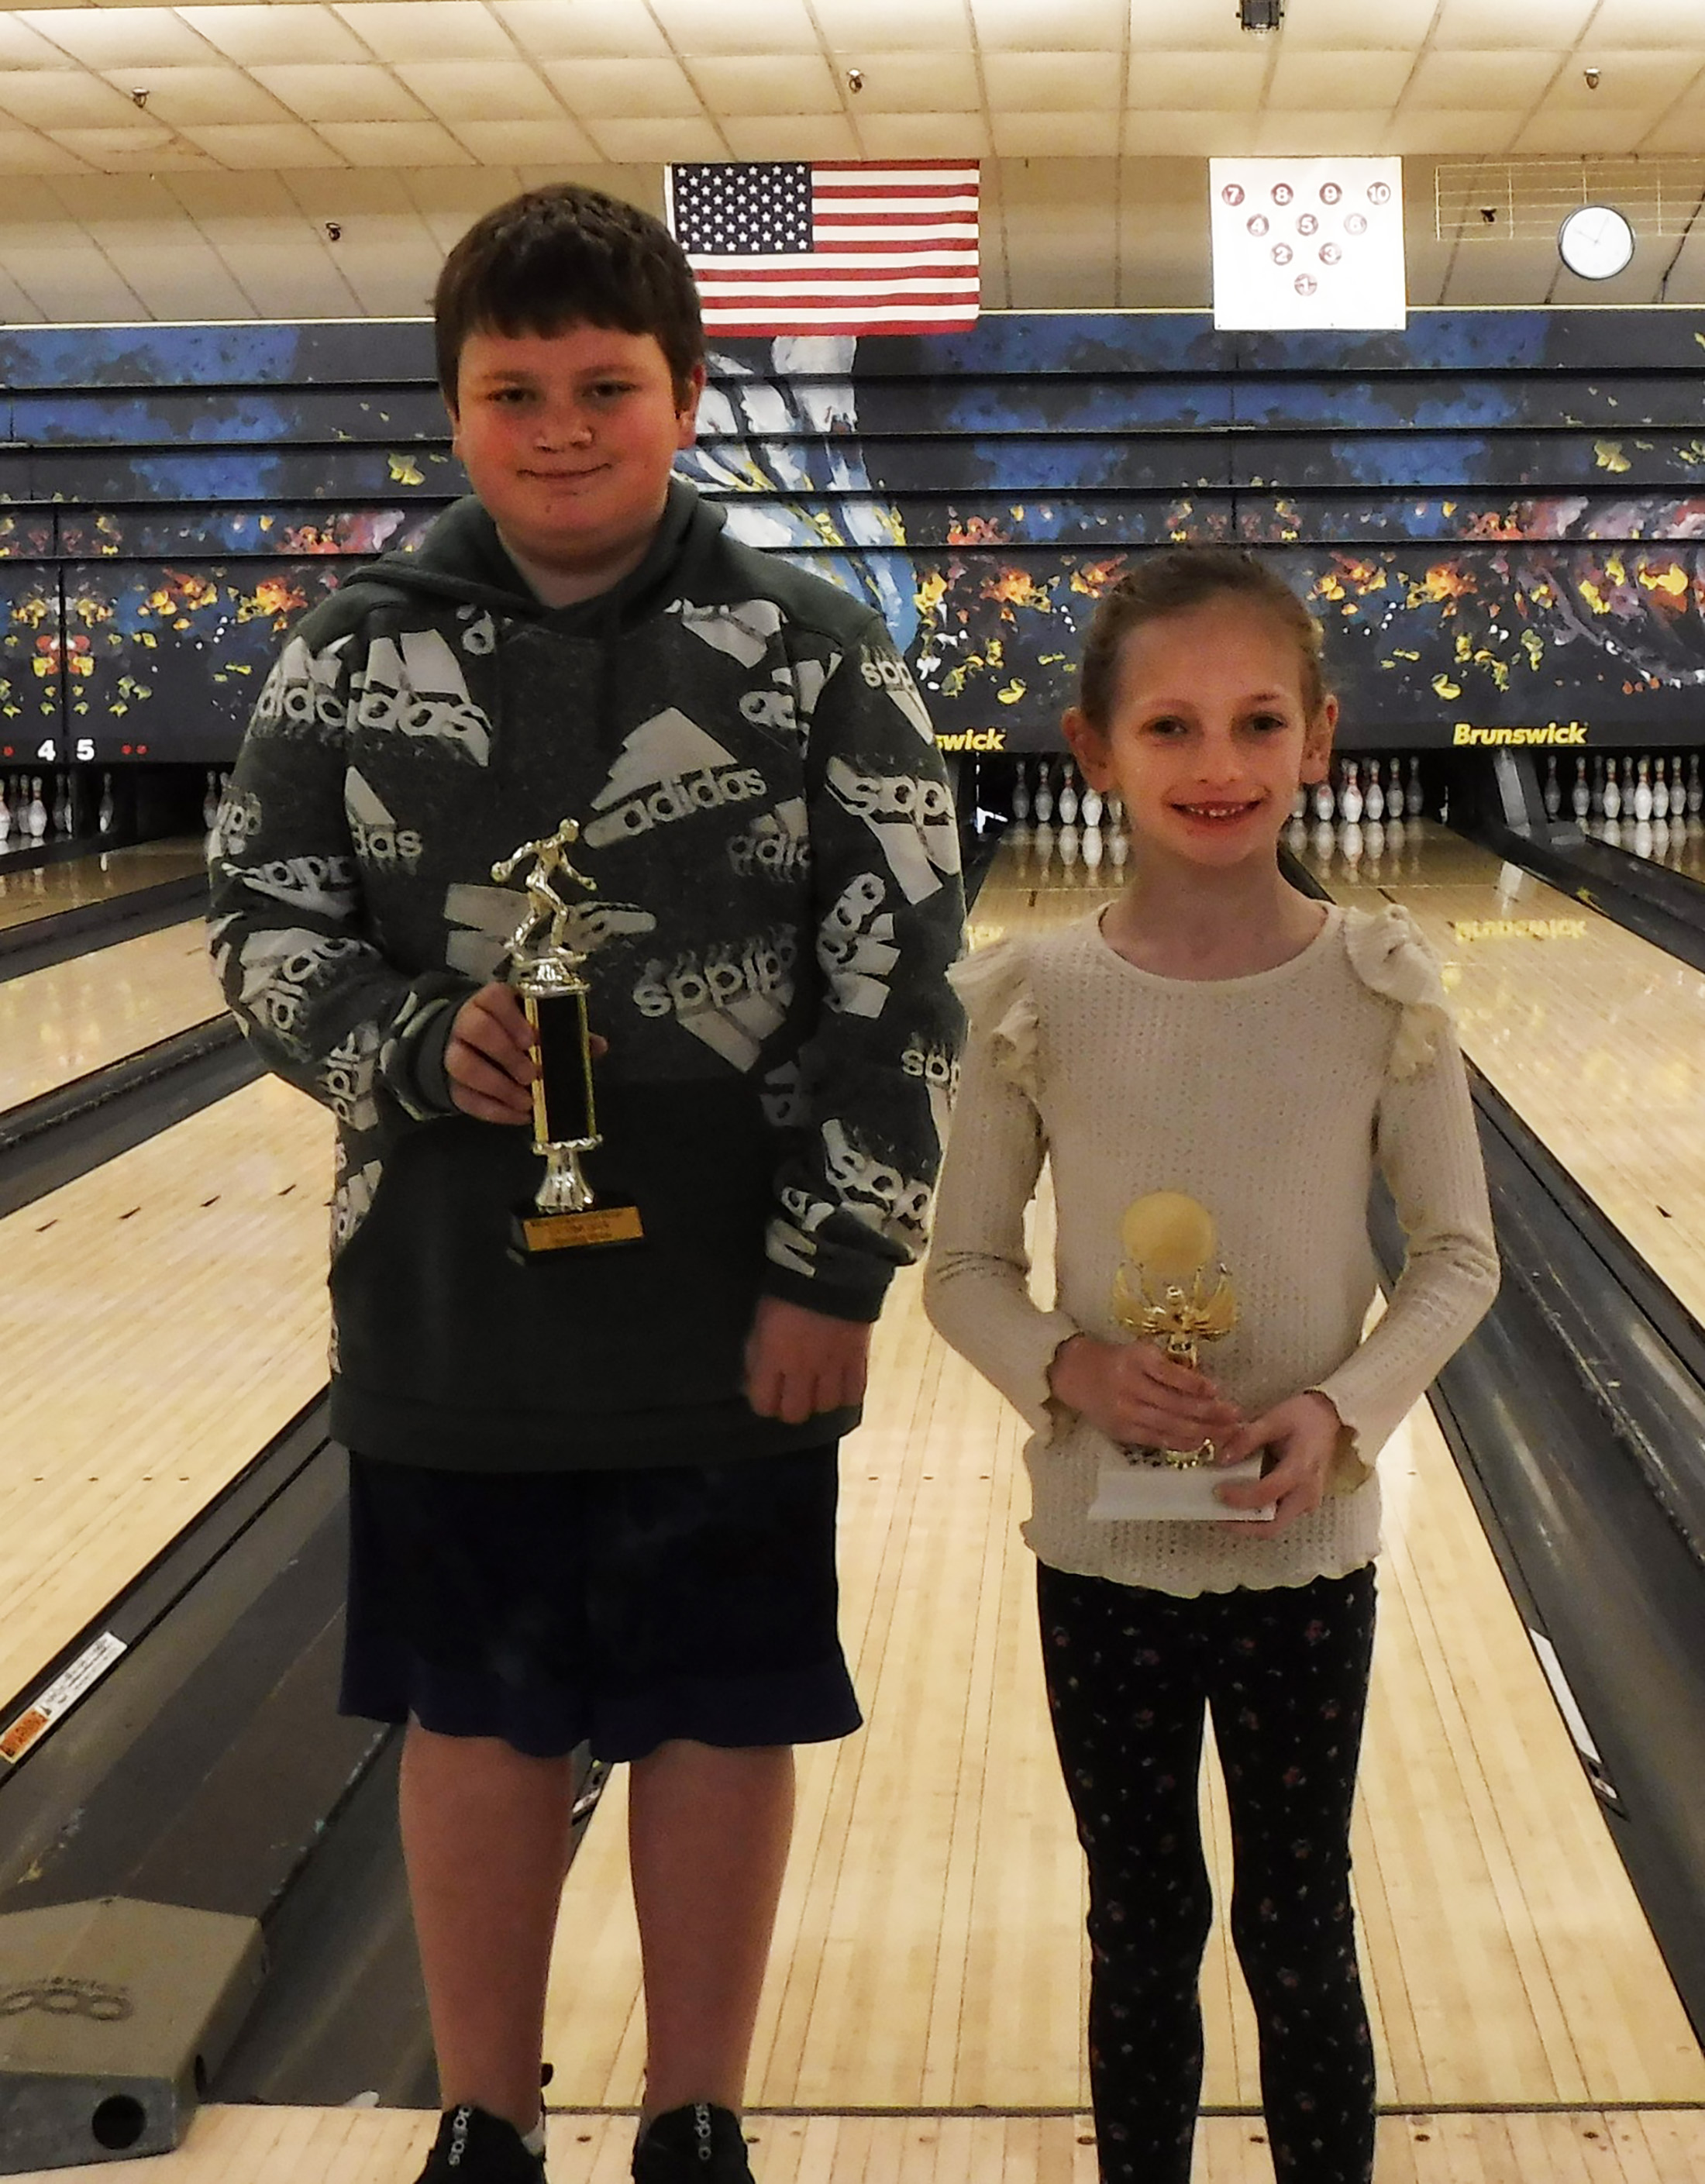 Charles City Youth Bowling League awards and honors outstanding rollers at banquet